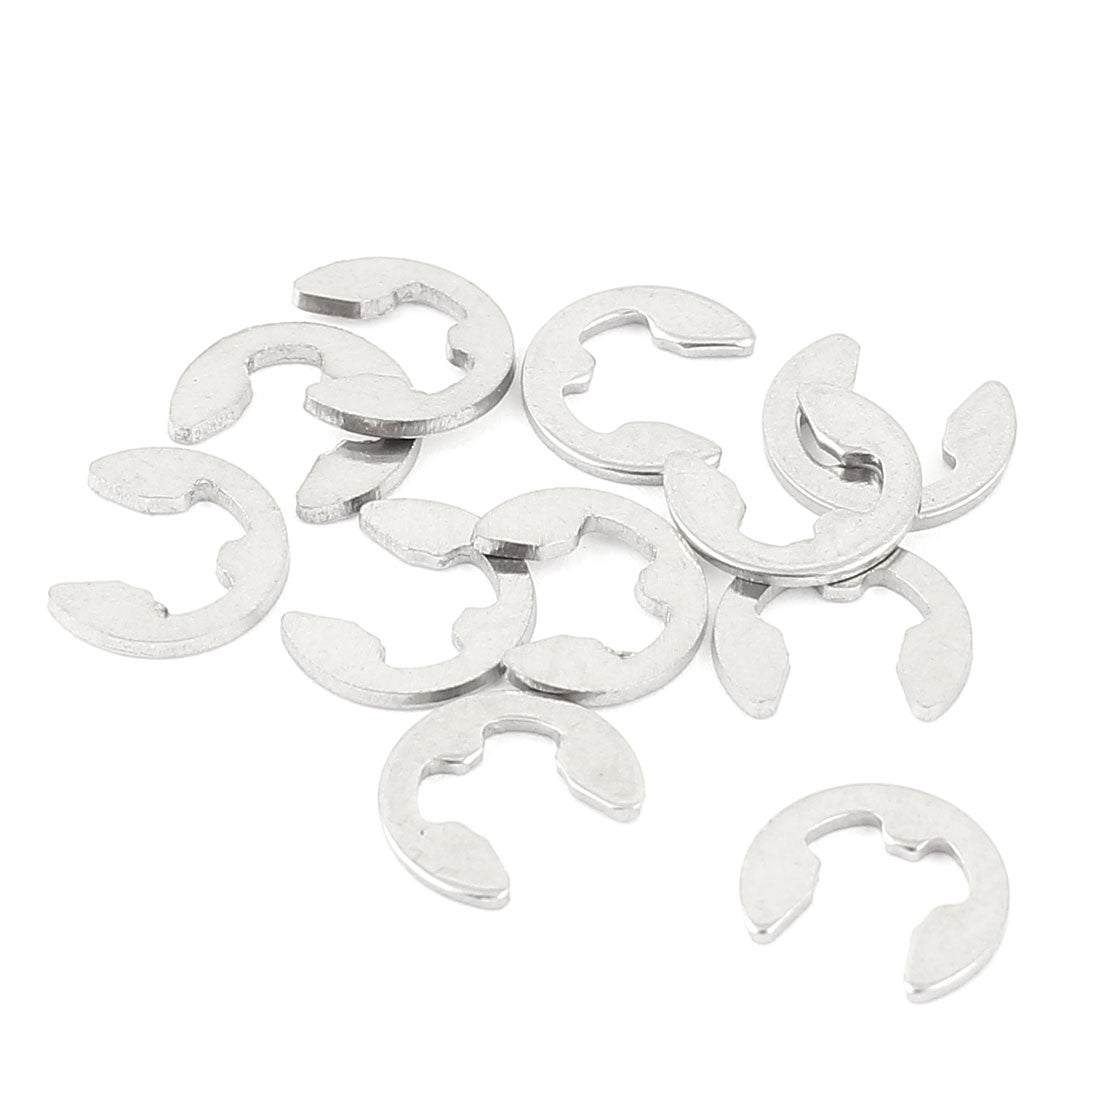 uxcell Uxcell 10pcs 304 Stainless Steel Fastener External Retaining Ring E-Clip Circlip 4mm